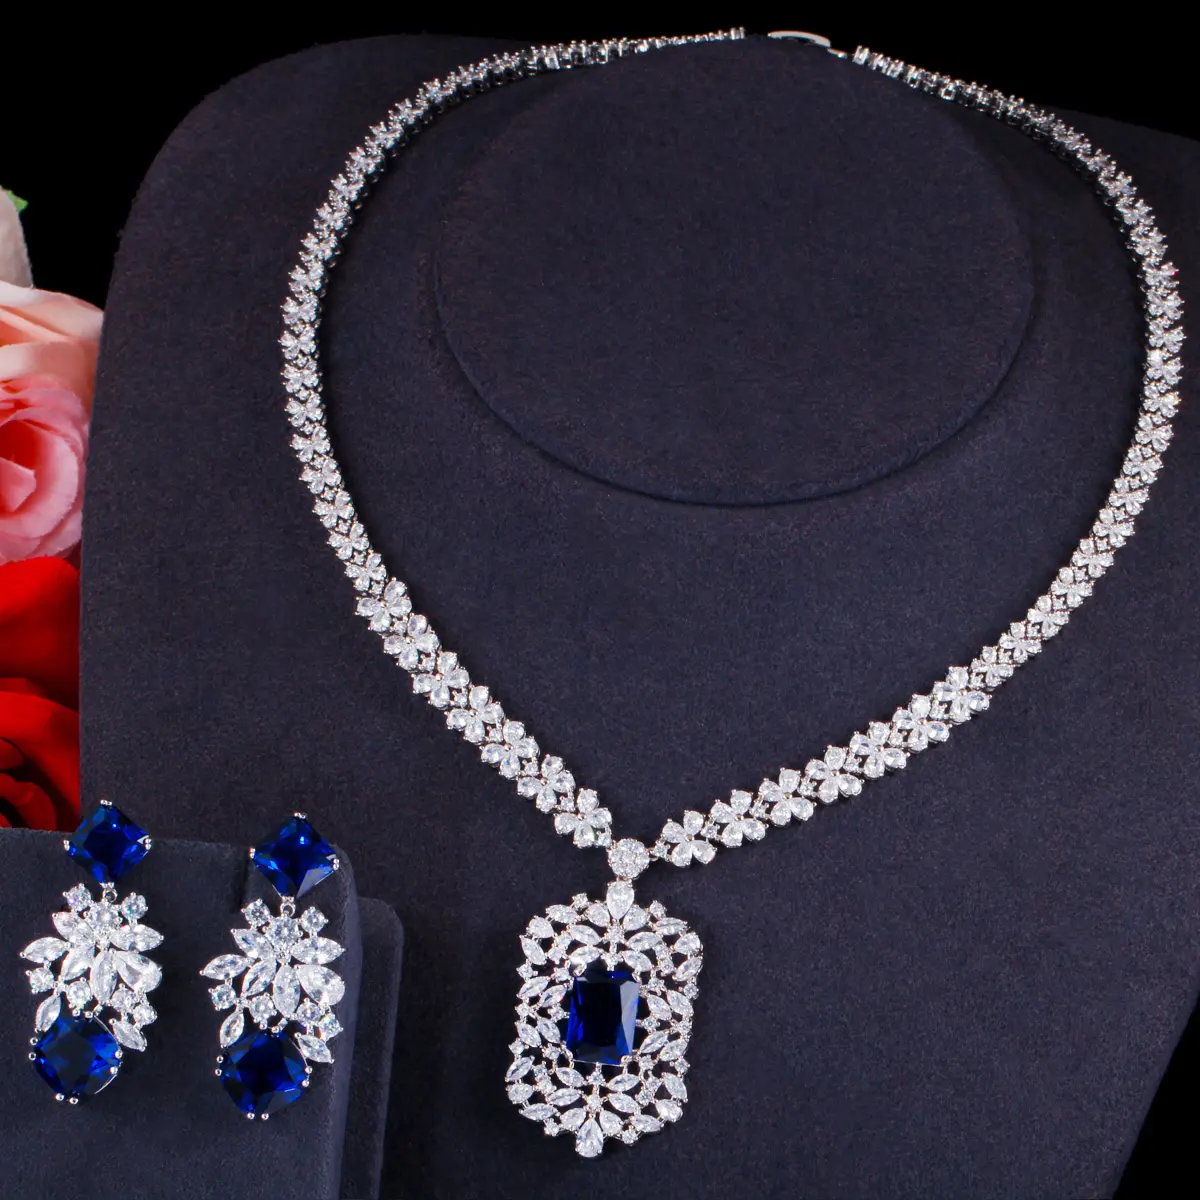 White Gold Color Blue Shiny Cubic Zircon Stone Indian Women Luxury Wedding Necklace and Earrings Costume Jewelry Set for Brides